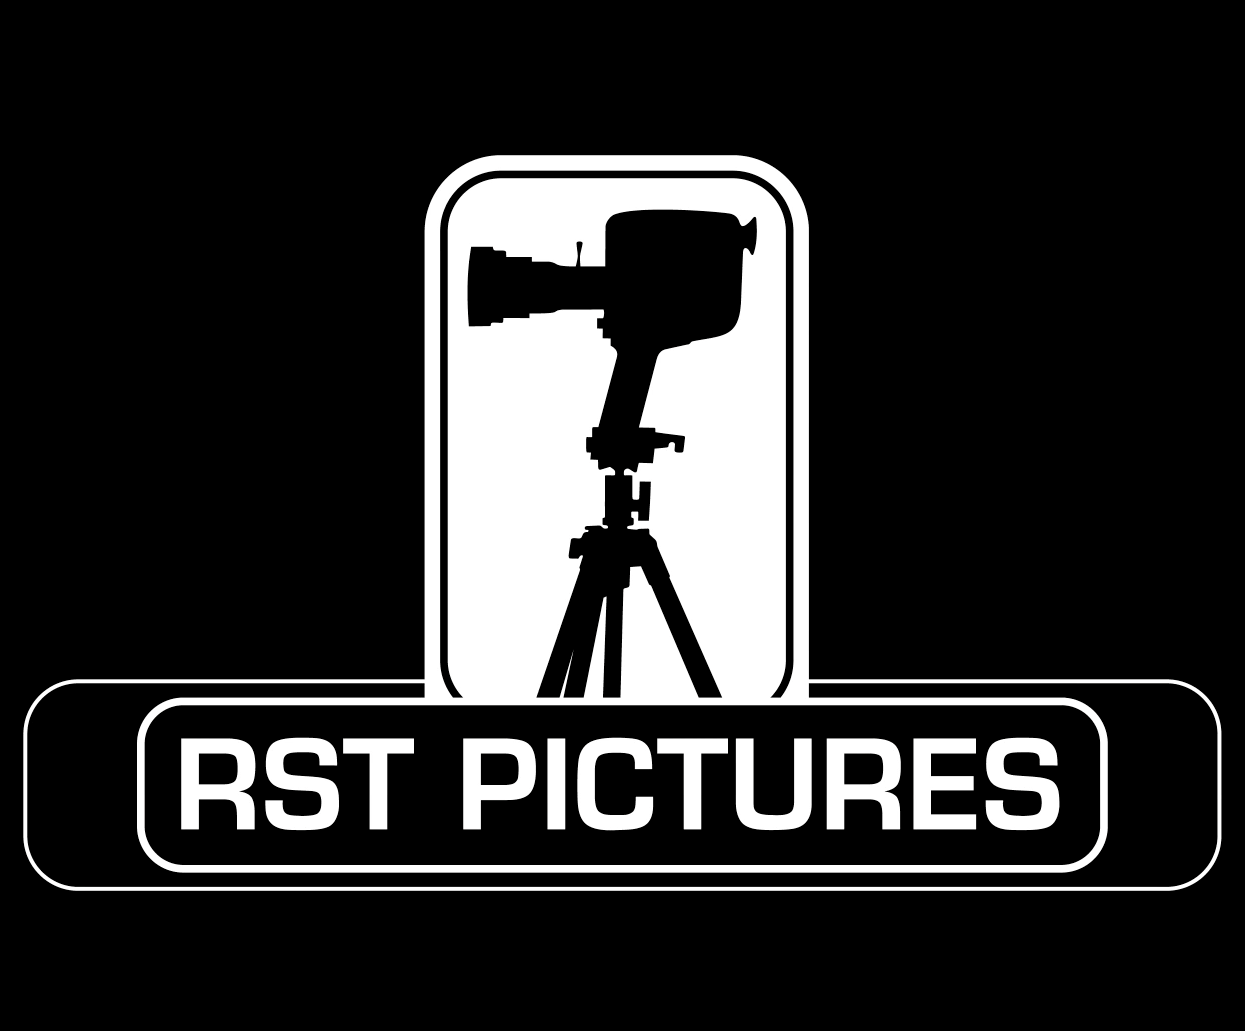 RST PICTURES